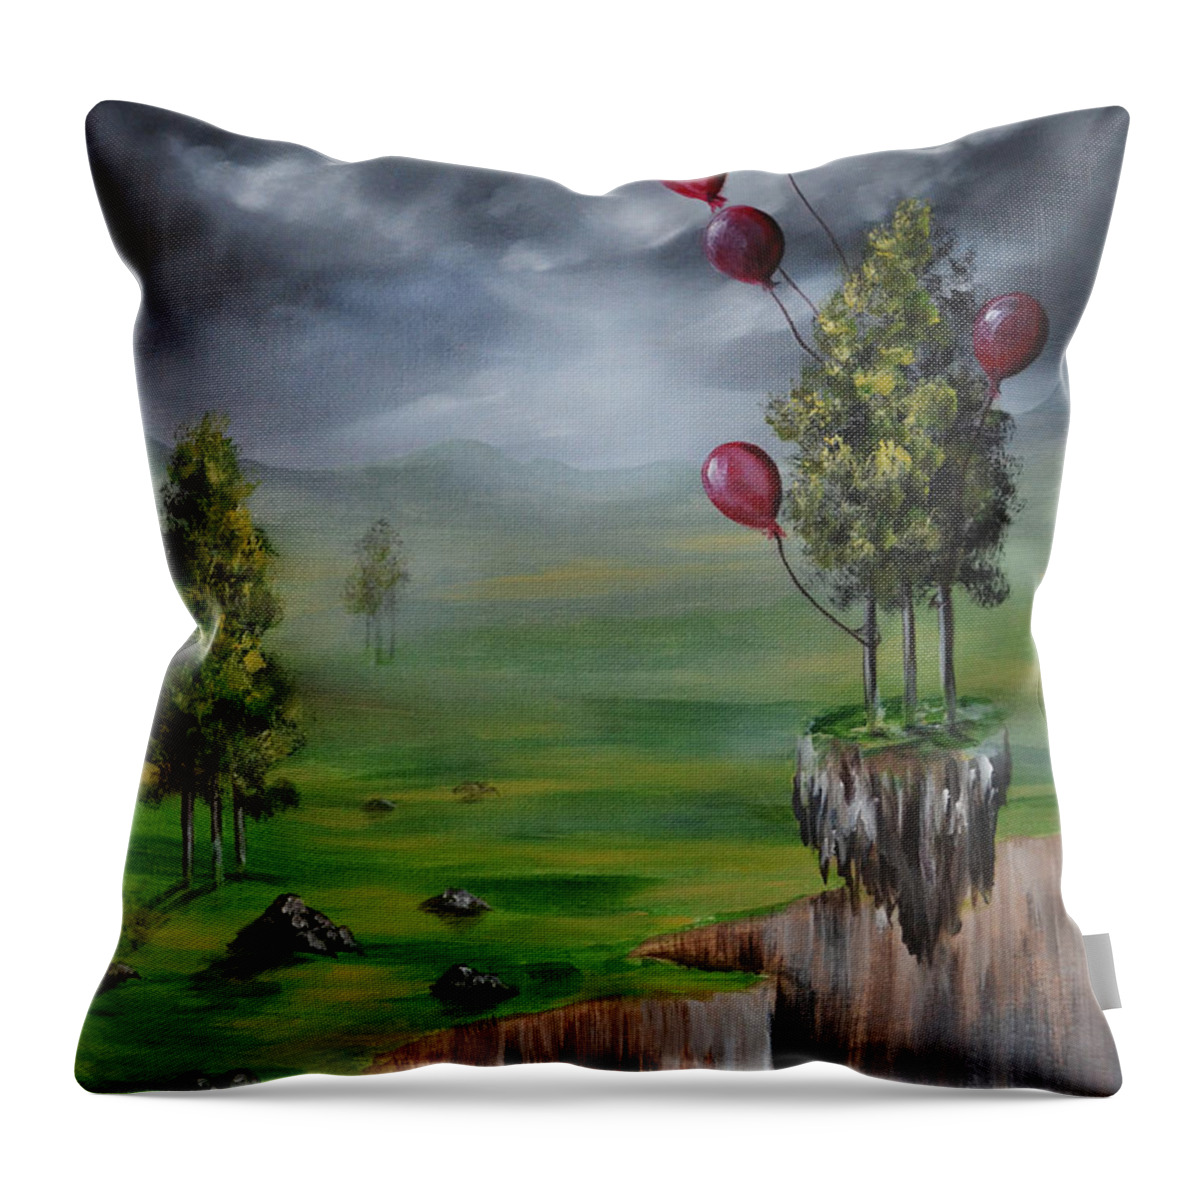 Lachri Throw Pillow featuring the painting Weightless by Lachri